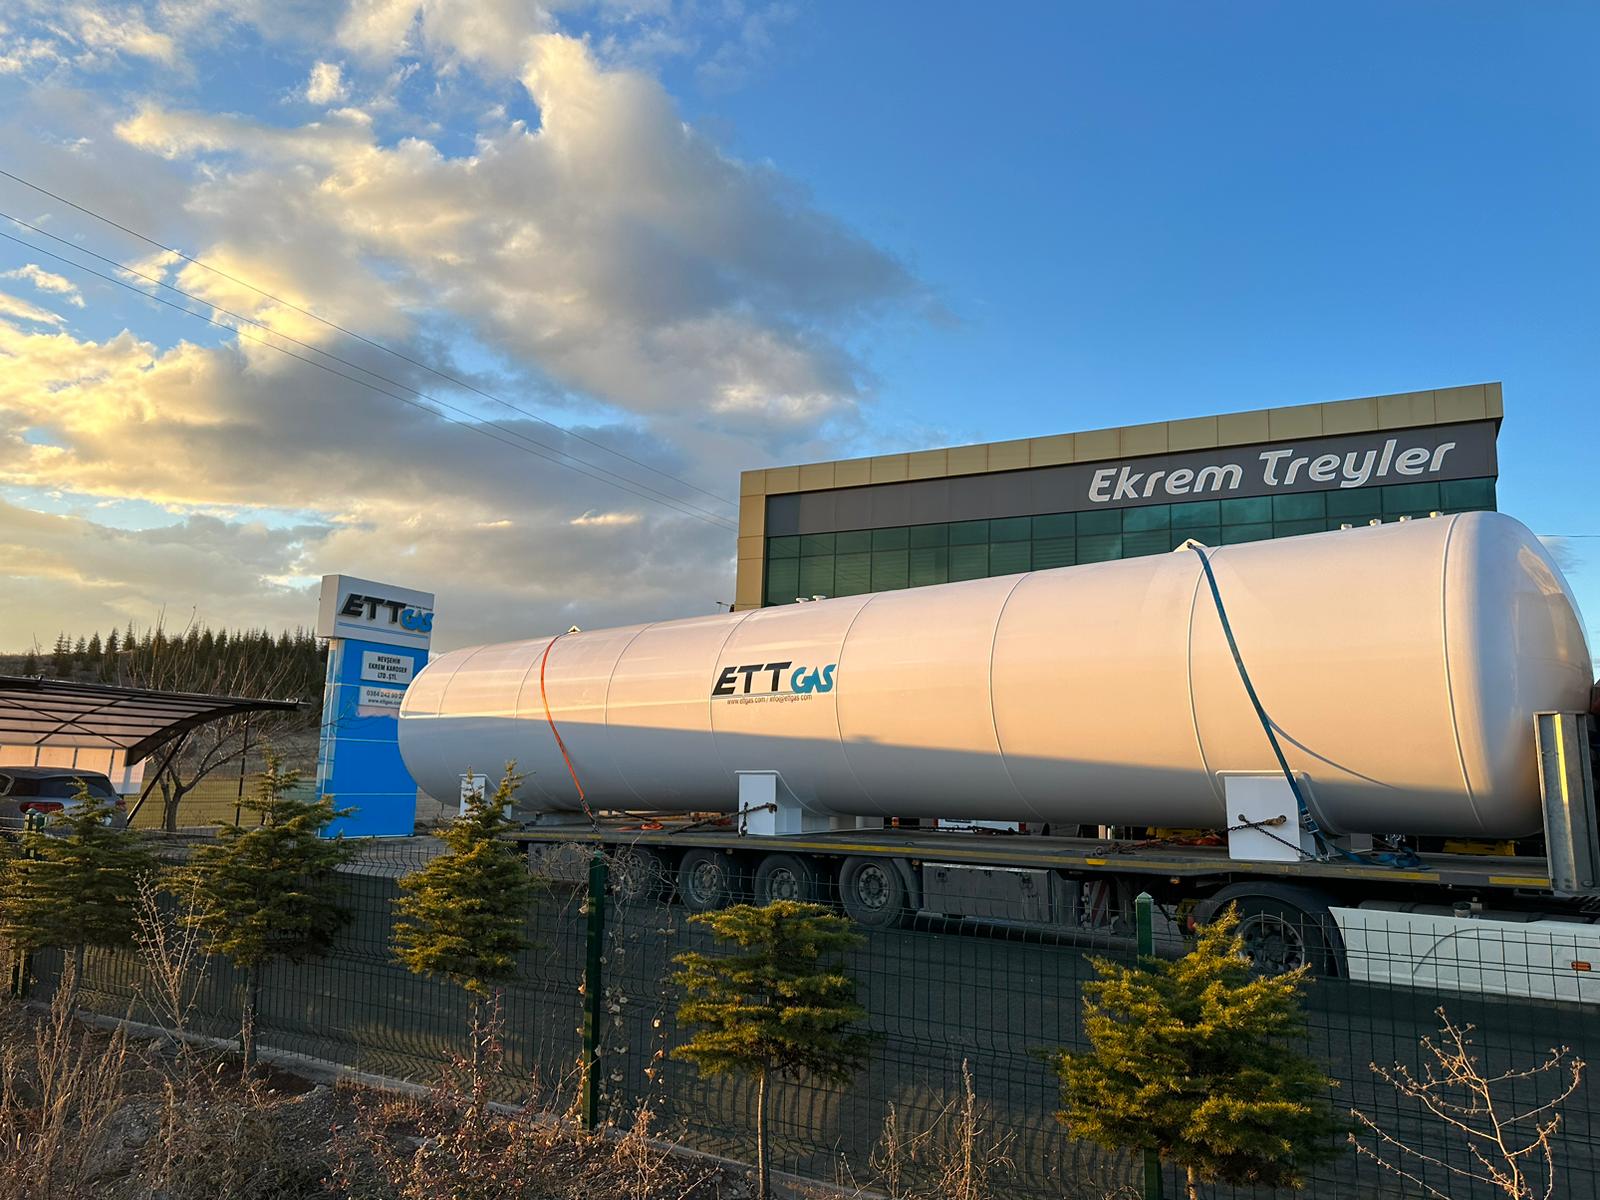 We delivered 100 m3 LPG storage tank with CE marked to European Country